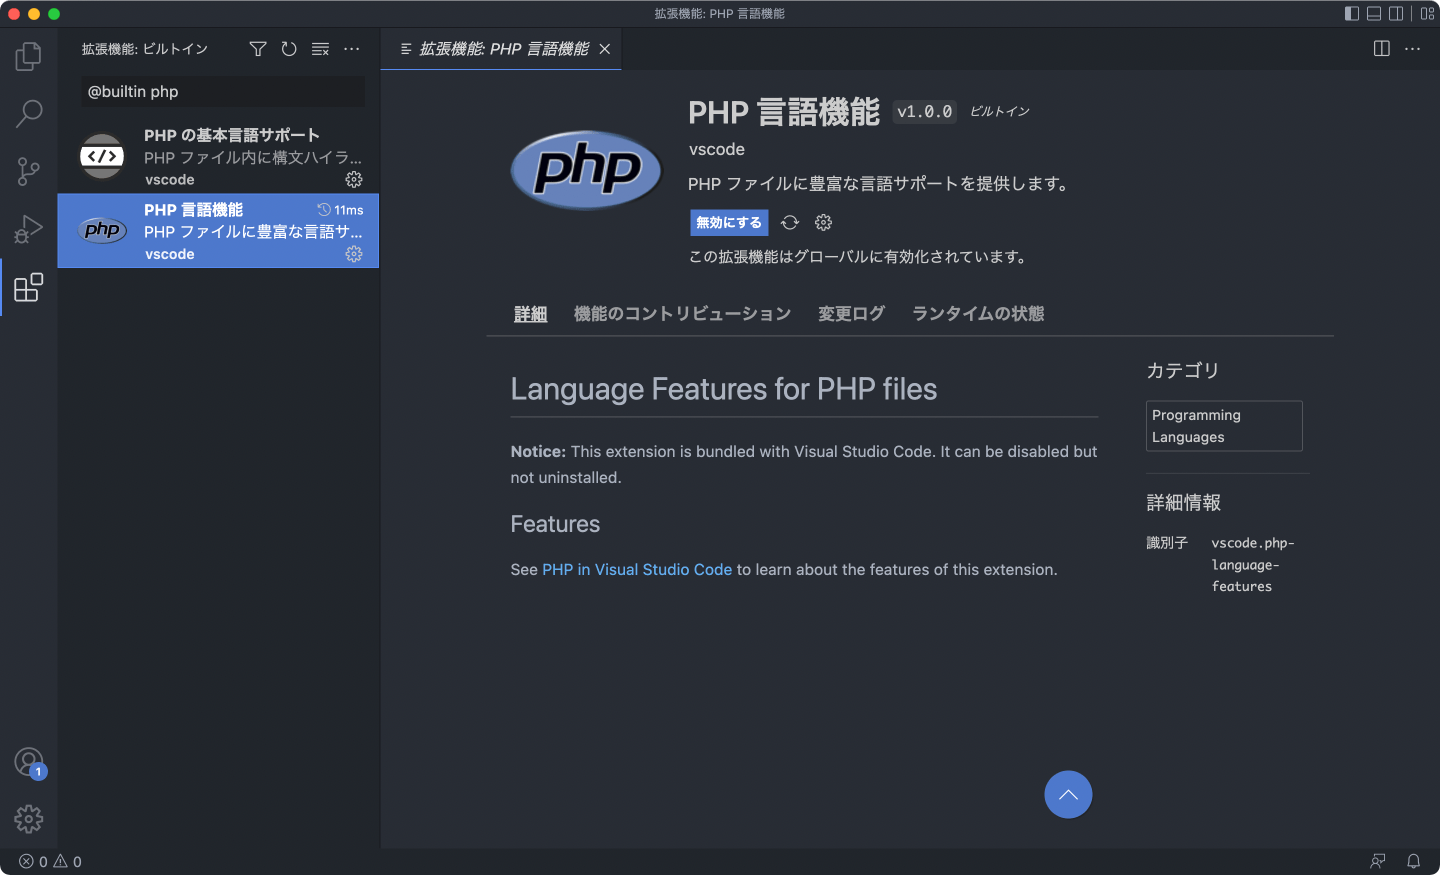 「PHP Language Features（PHP 言語機能）」を無効